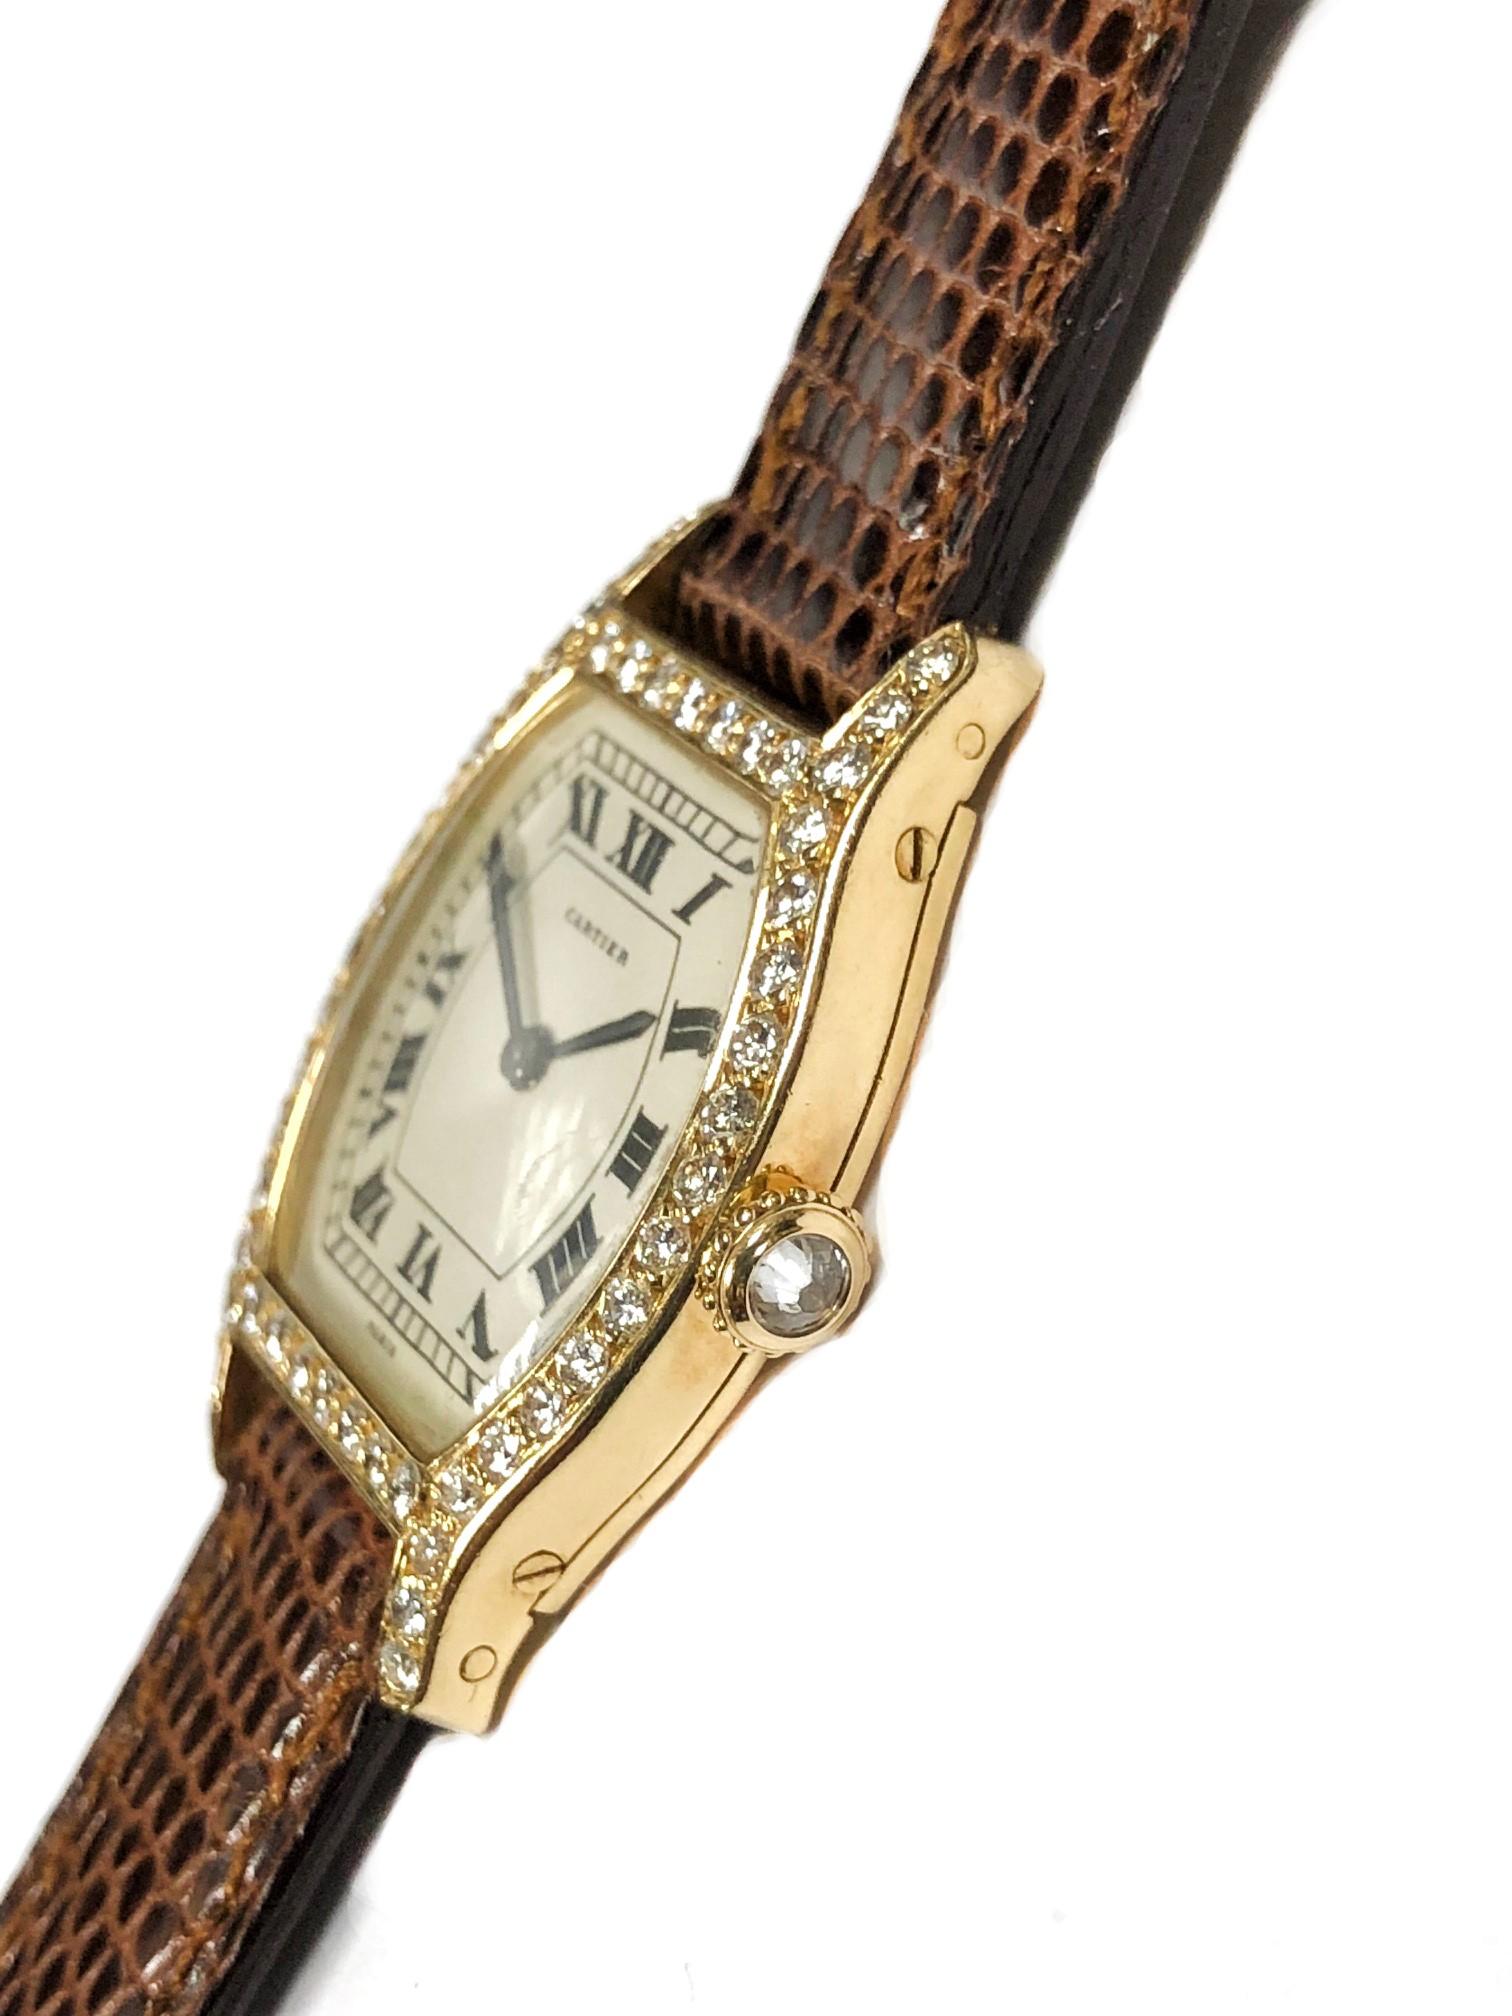 Circa 1990s Cartier Paris Tortue Collection Ladies Wrist watch. 30 X 23 MM 18K yellow Gold Case with Cartier Factory set Diamond Bezel, lugs and Crown. Mechanical, Manual wind Movement, Silver White Dial with Black Roman numerals. New 1/2 inch wide